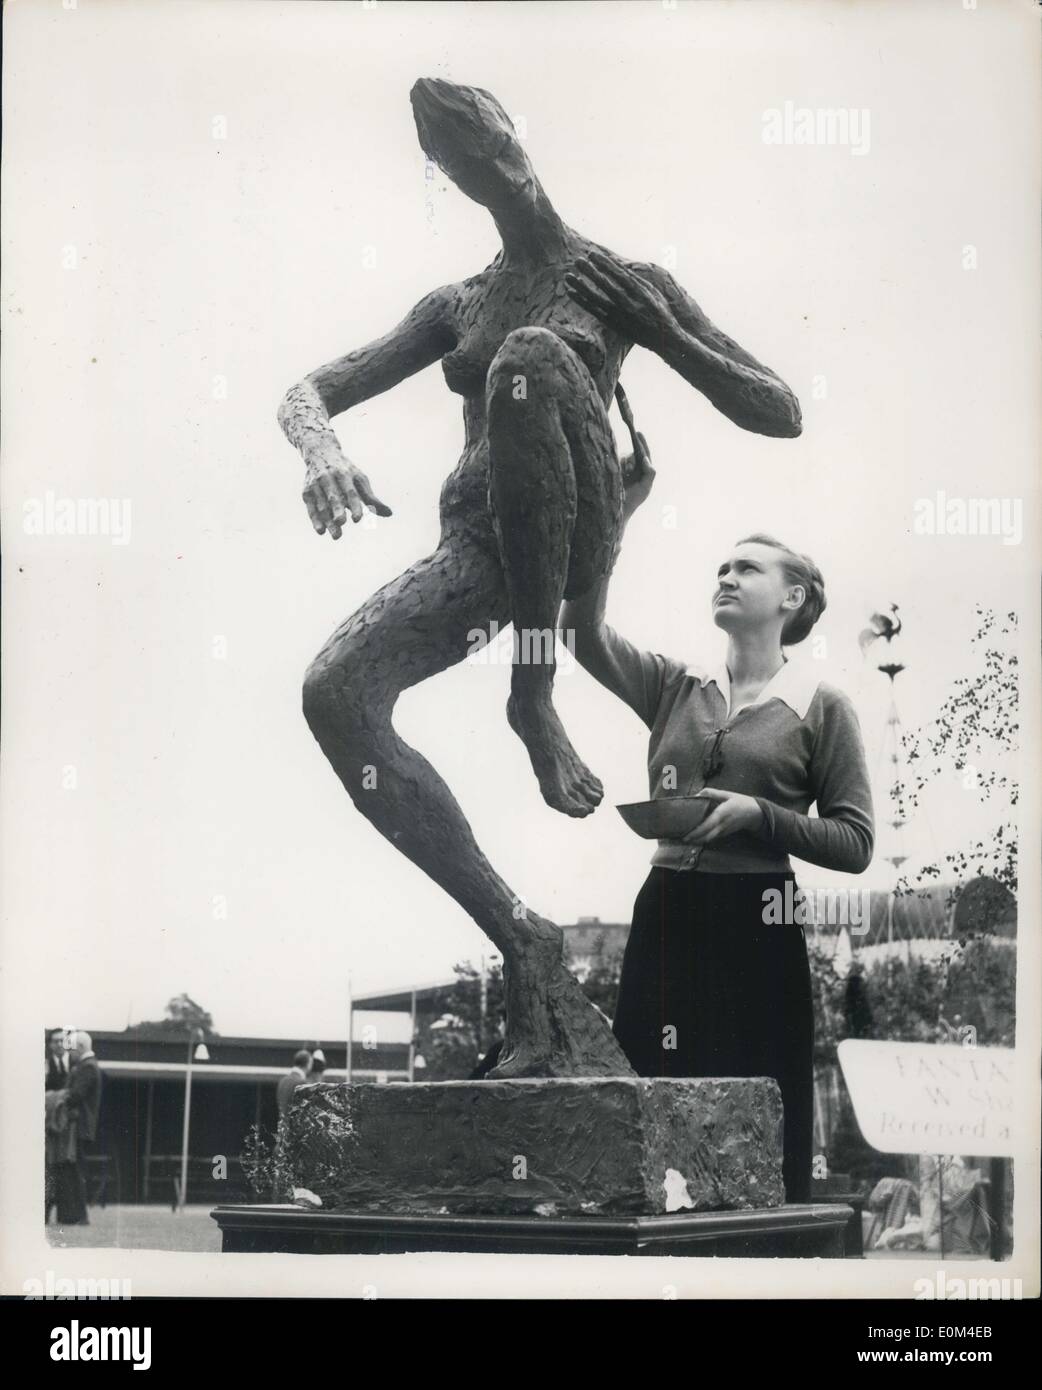 Jun. 24, 1953 - Midsummer Madness - sculptures on exhibition in Battersea  pleasure gardens.: A sculpture competition in which students from all over  britain were asked to submit their conception of Midsummer